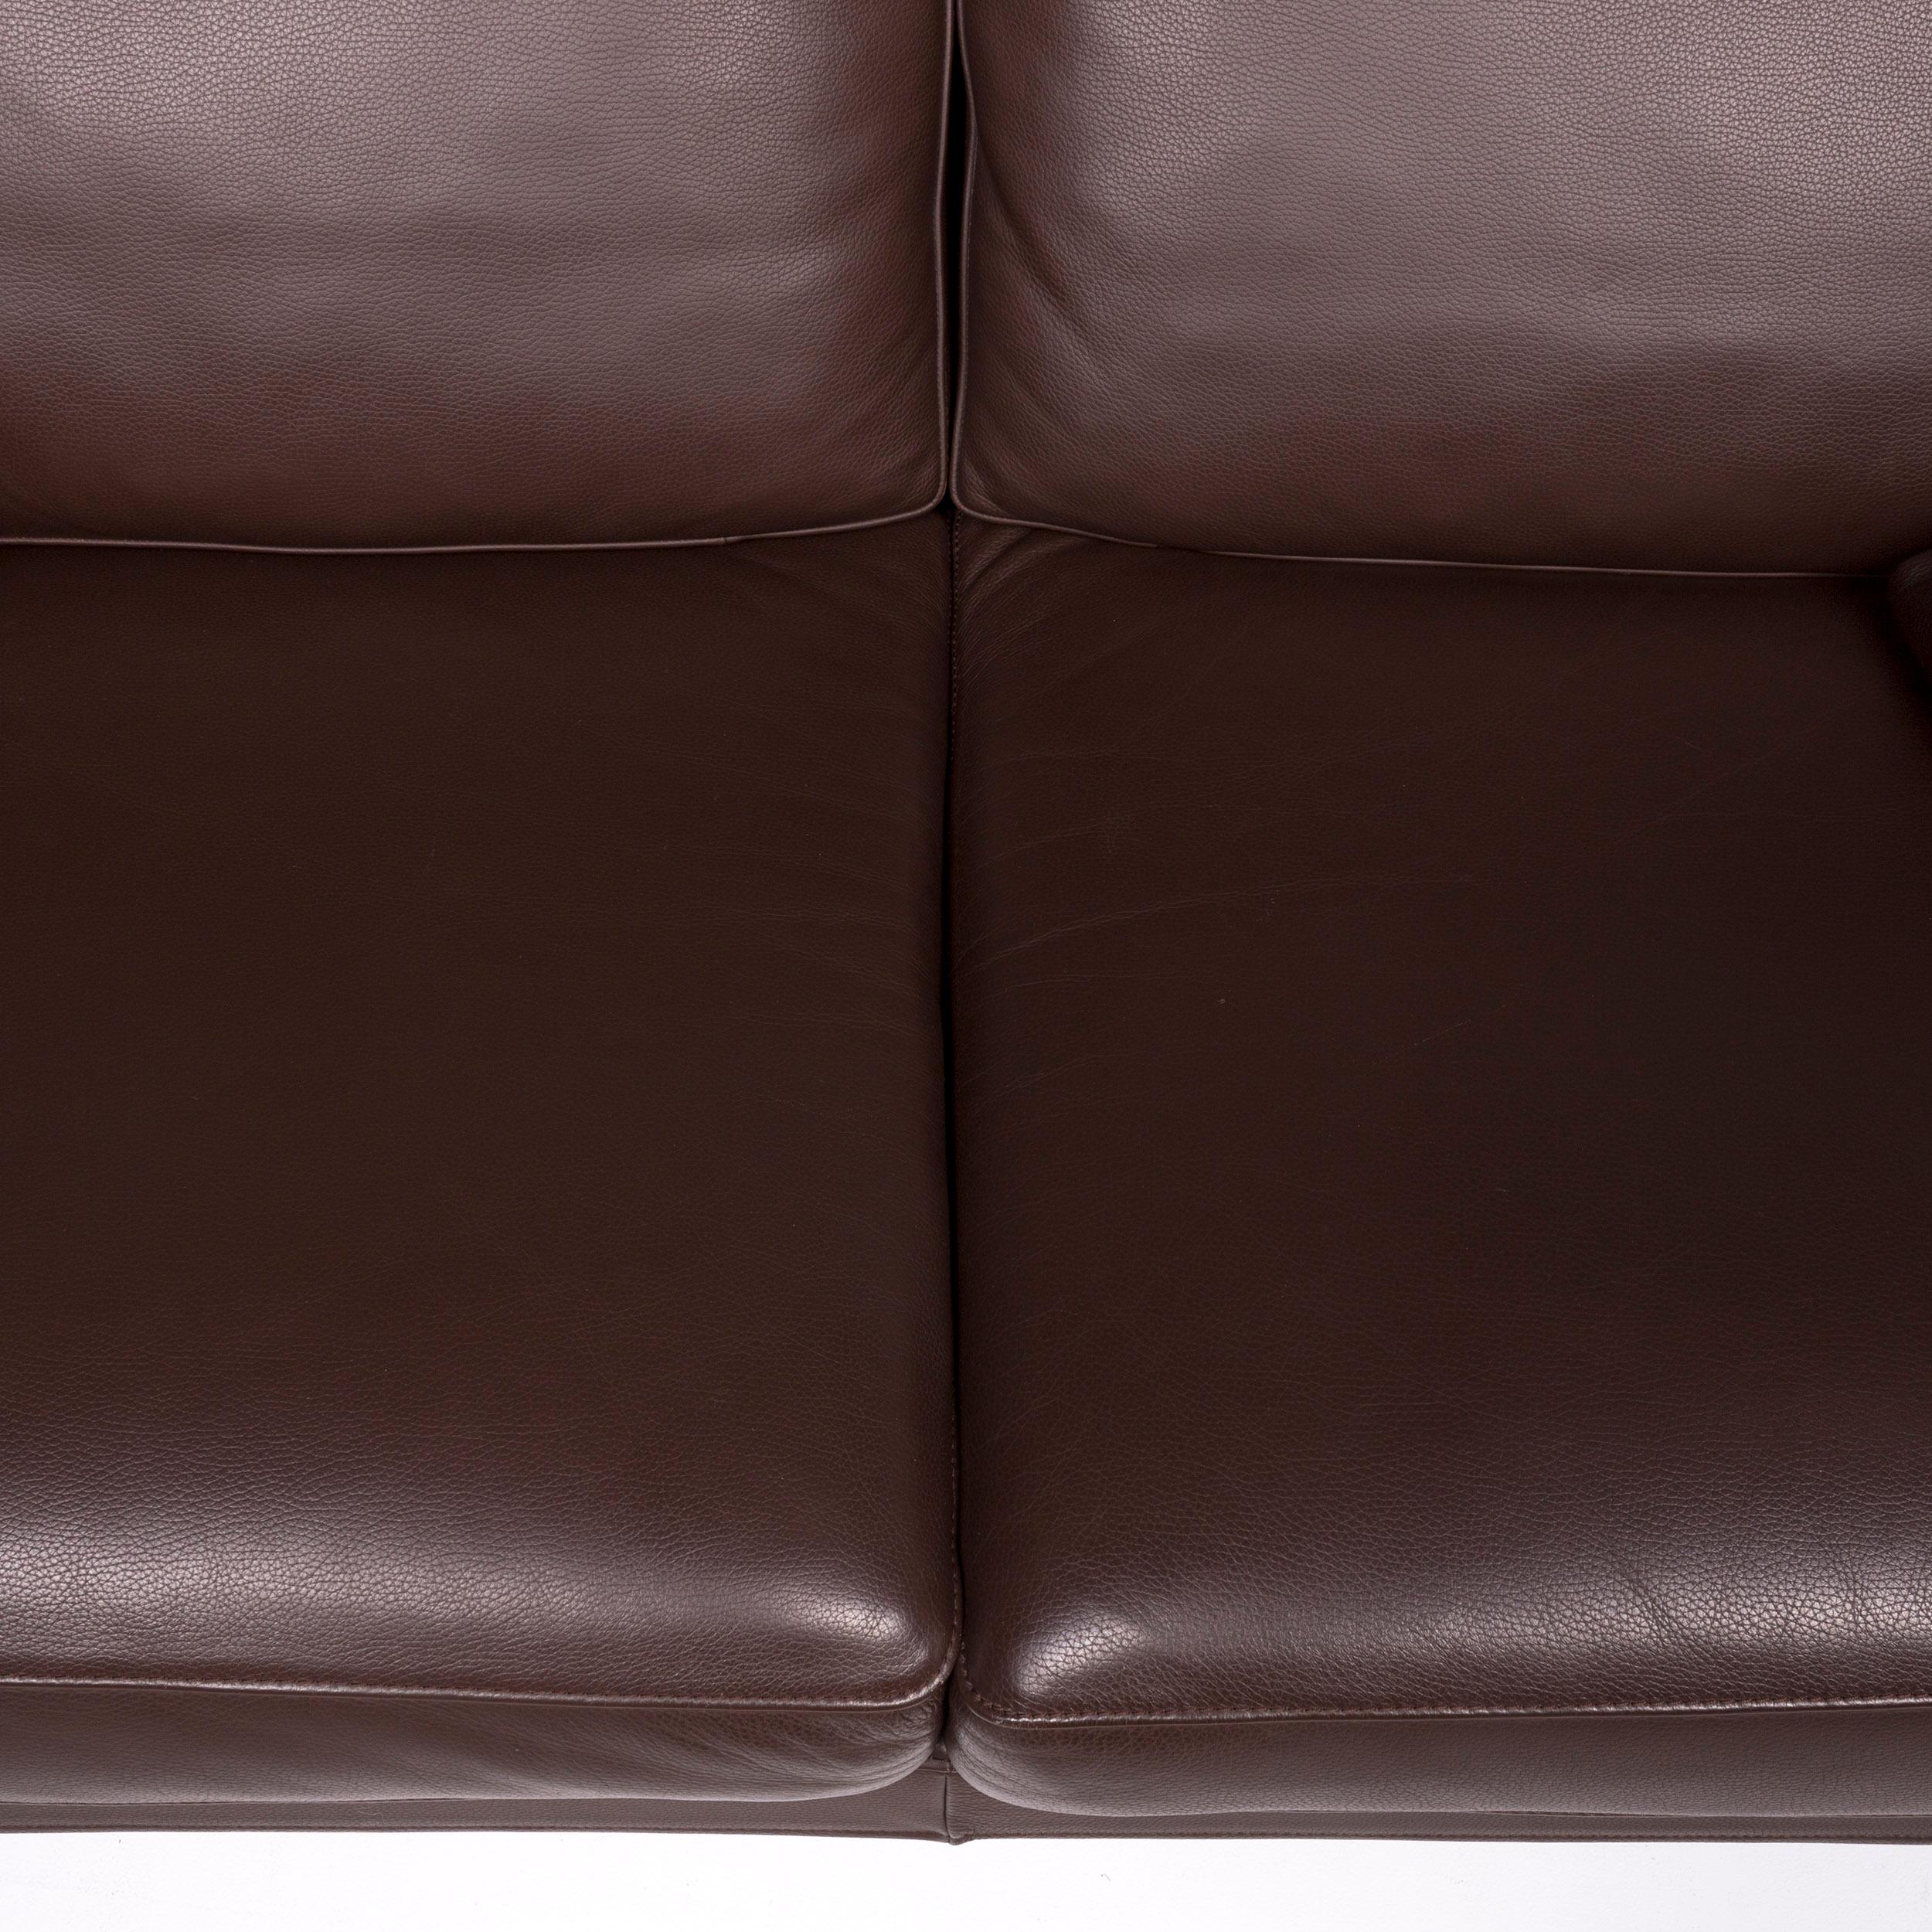 FSM Clarus Leather Sofa Set Brown Dark Brown 1 Three-Seat 1 Two-Seat For Sale 9